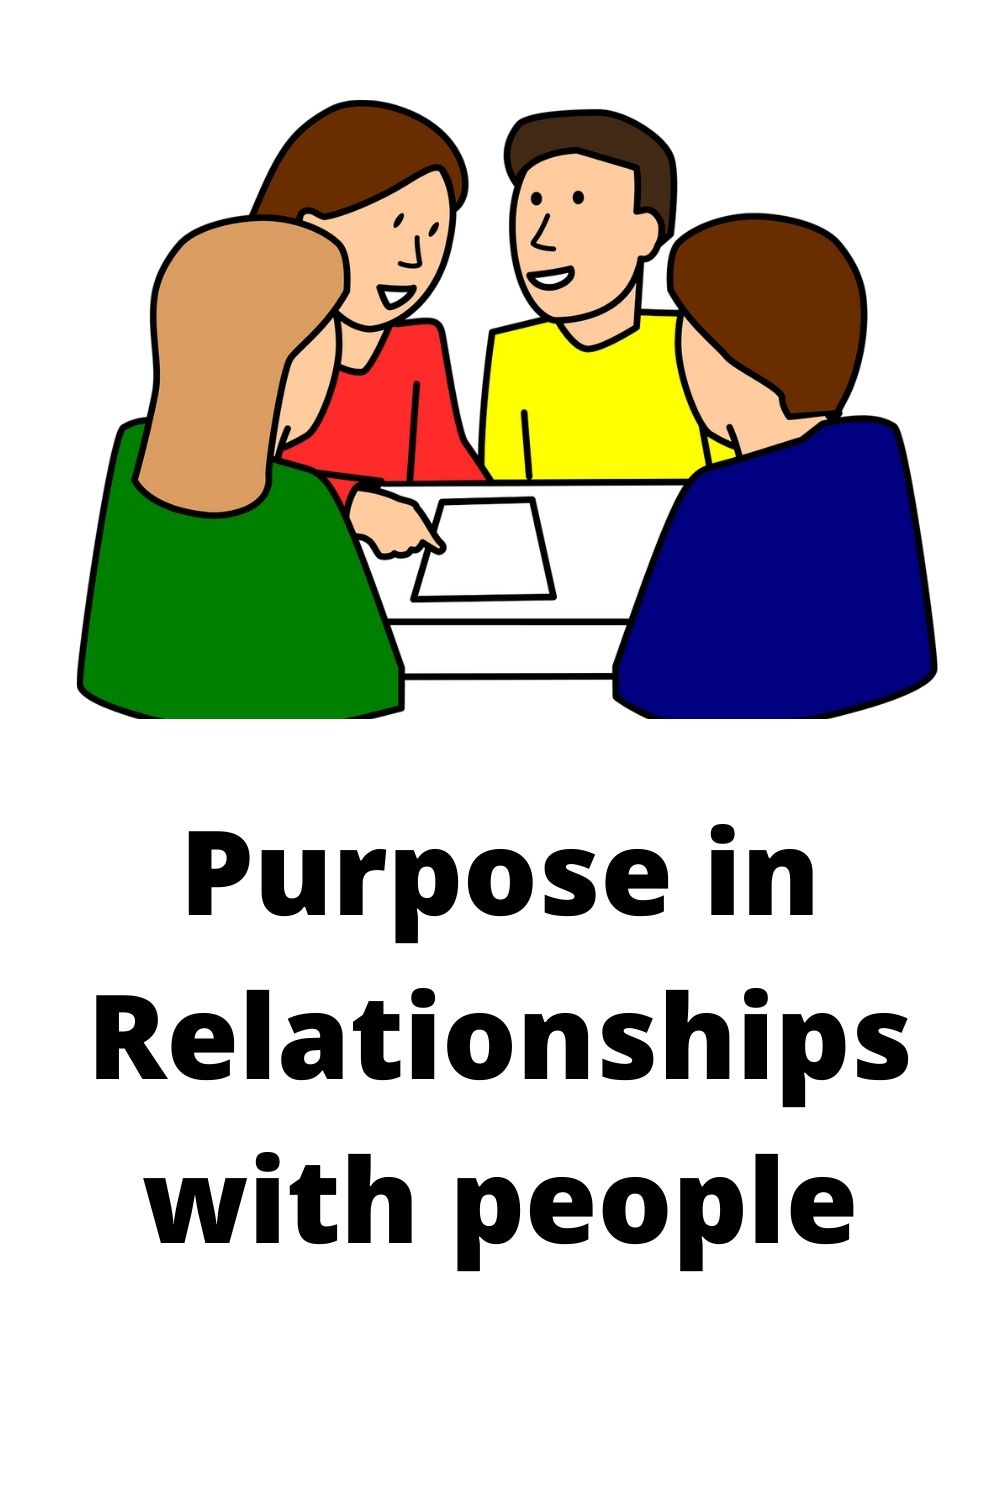 Our neighbour: Purpose in Relationships with people